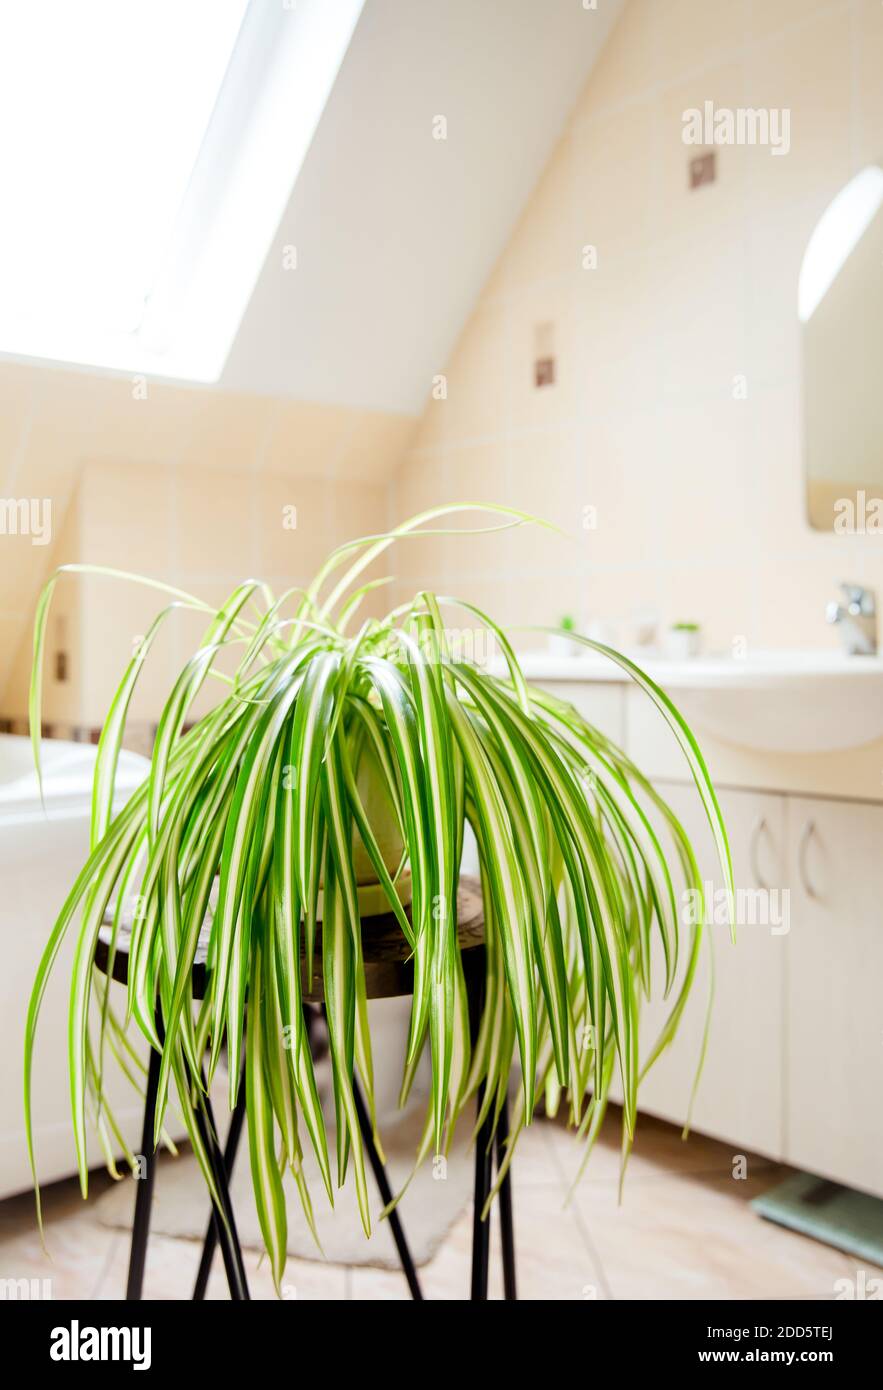 Chlorophytum comosum, called spider plant or airplane plant growing in white pot in bright white bathroom. Great air purifying plant. Stock Photo